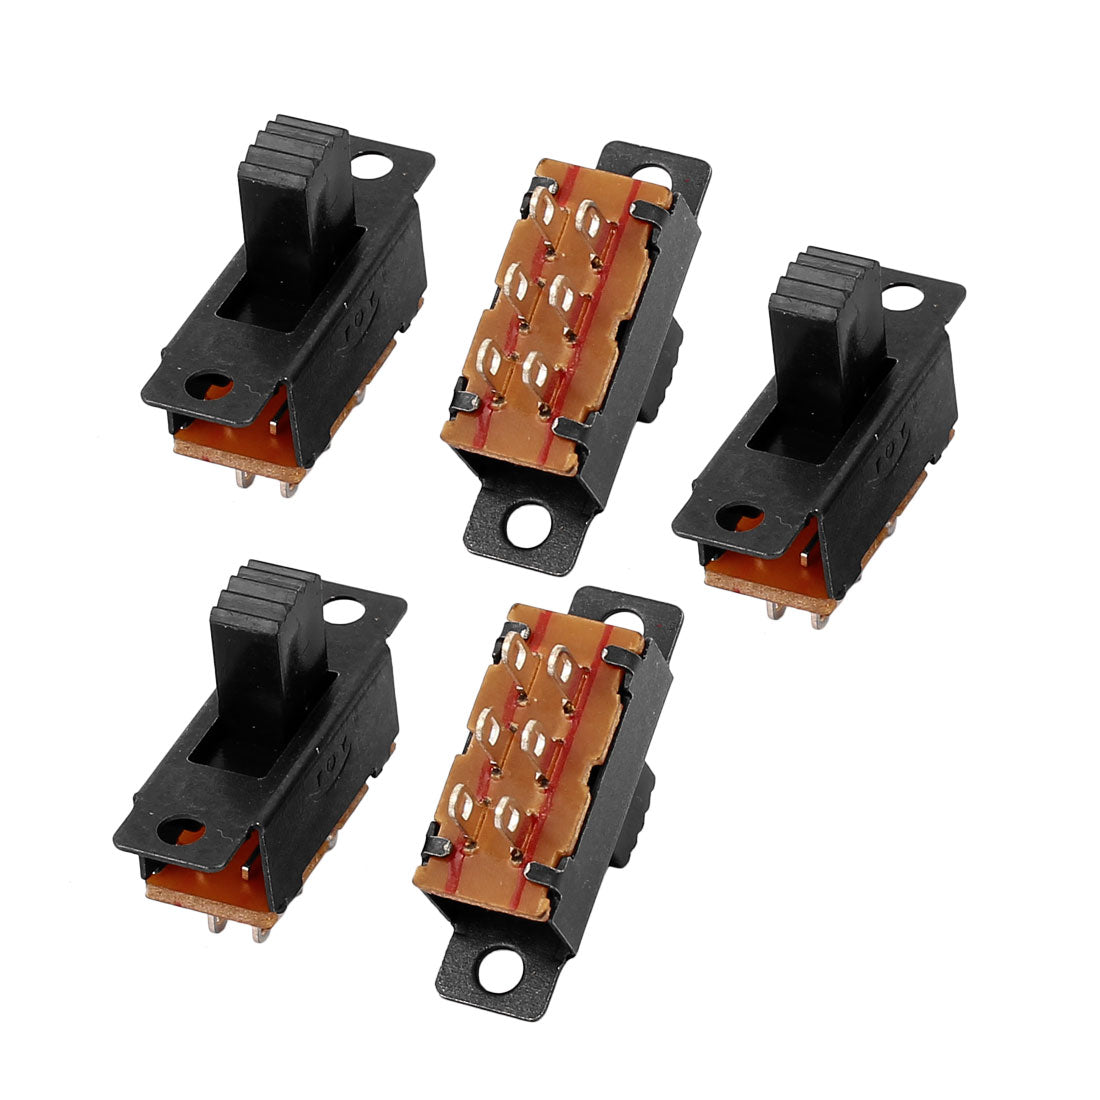 uxcell Uxcell 5pcs DPDT 2 Position 6 Terminals Panel Mount Horizontal Slide Switch